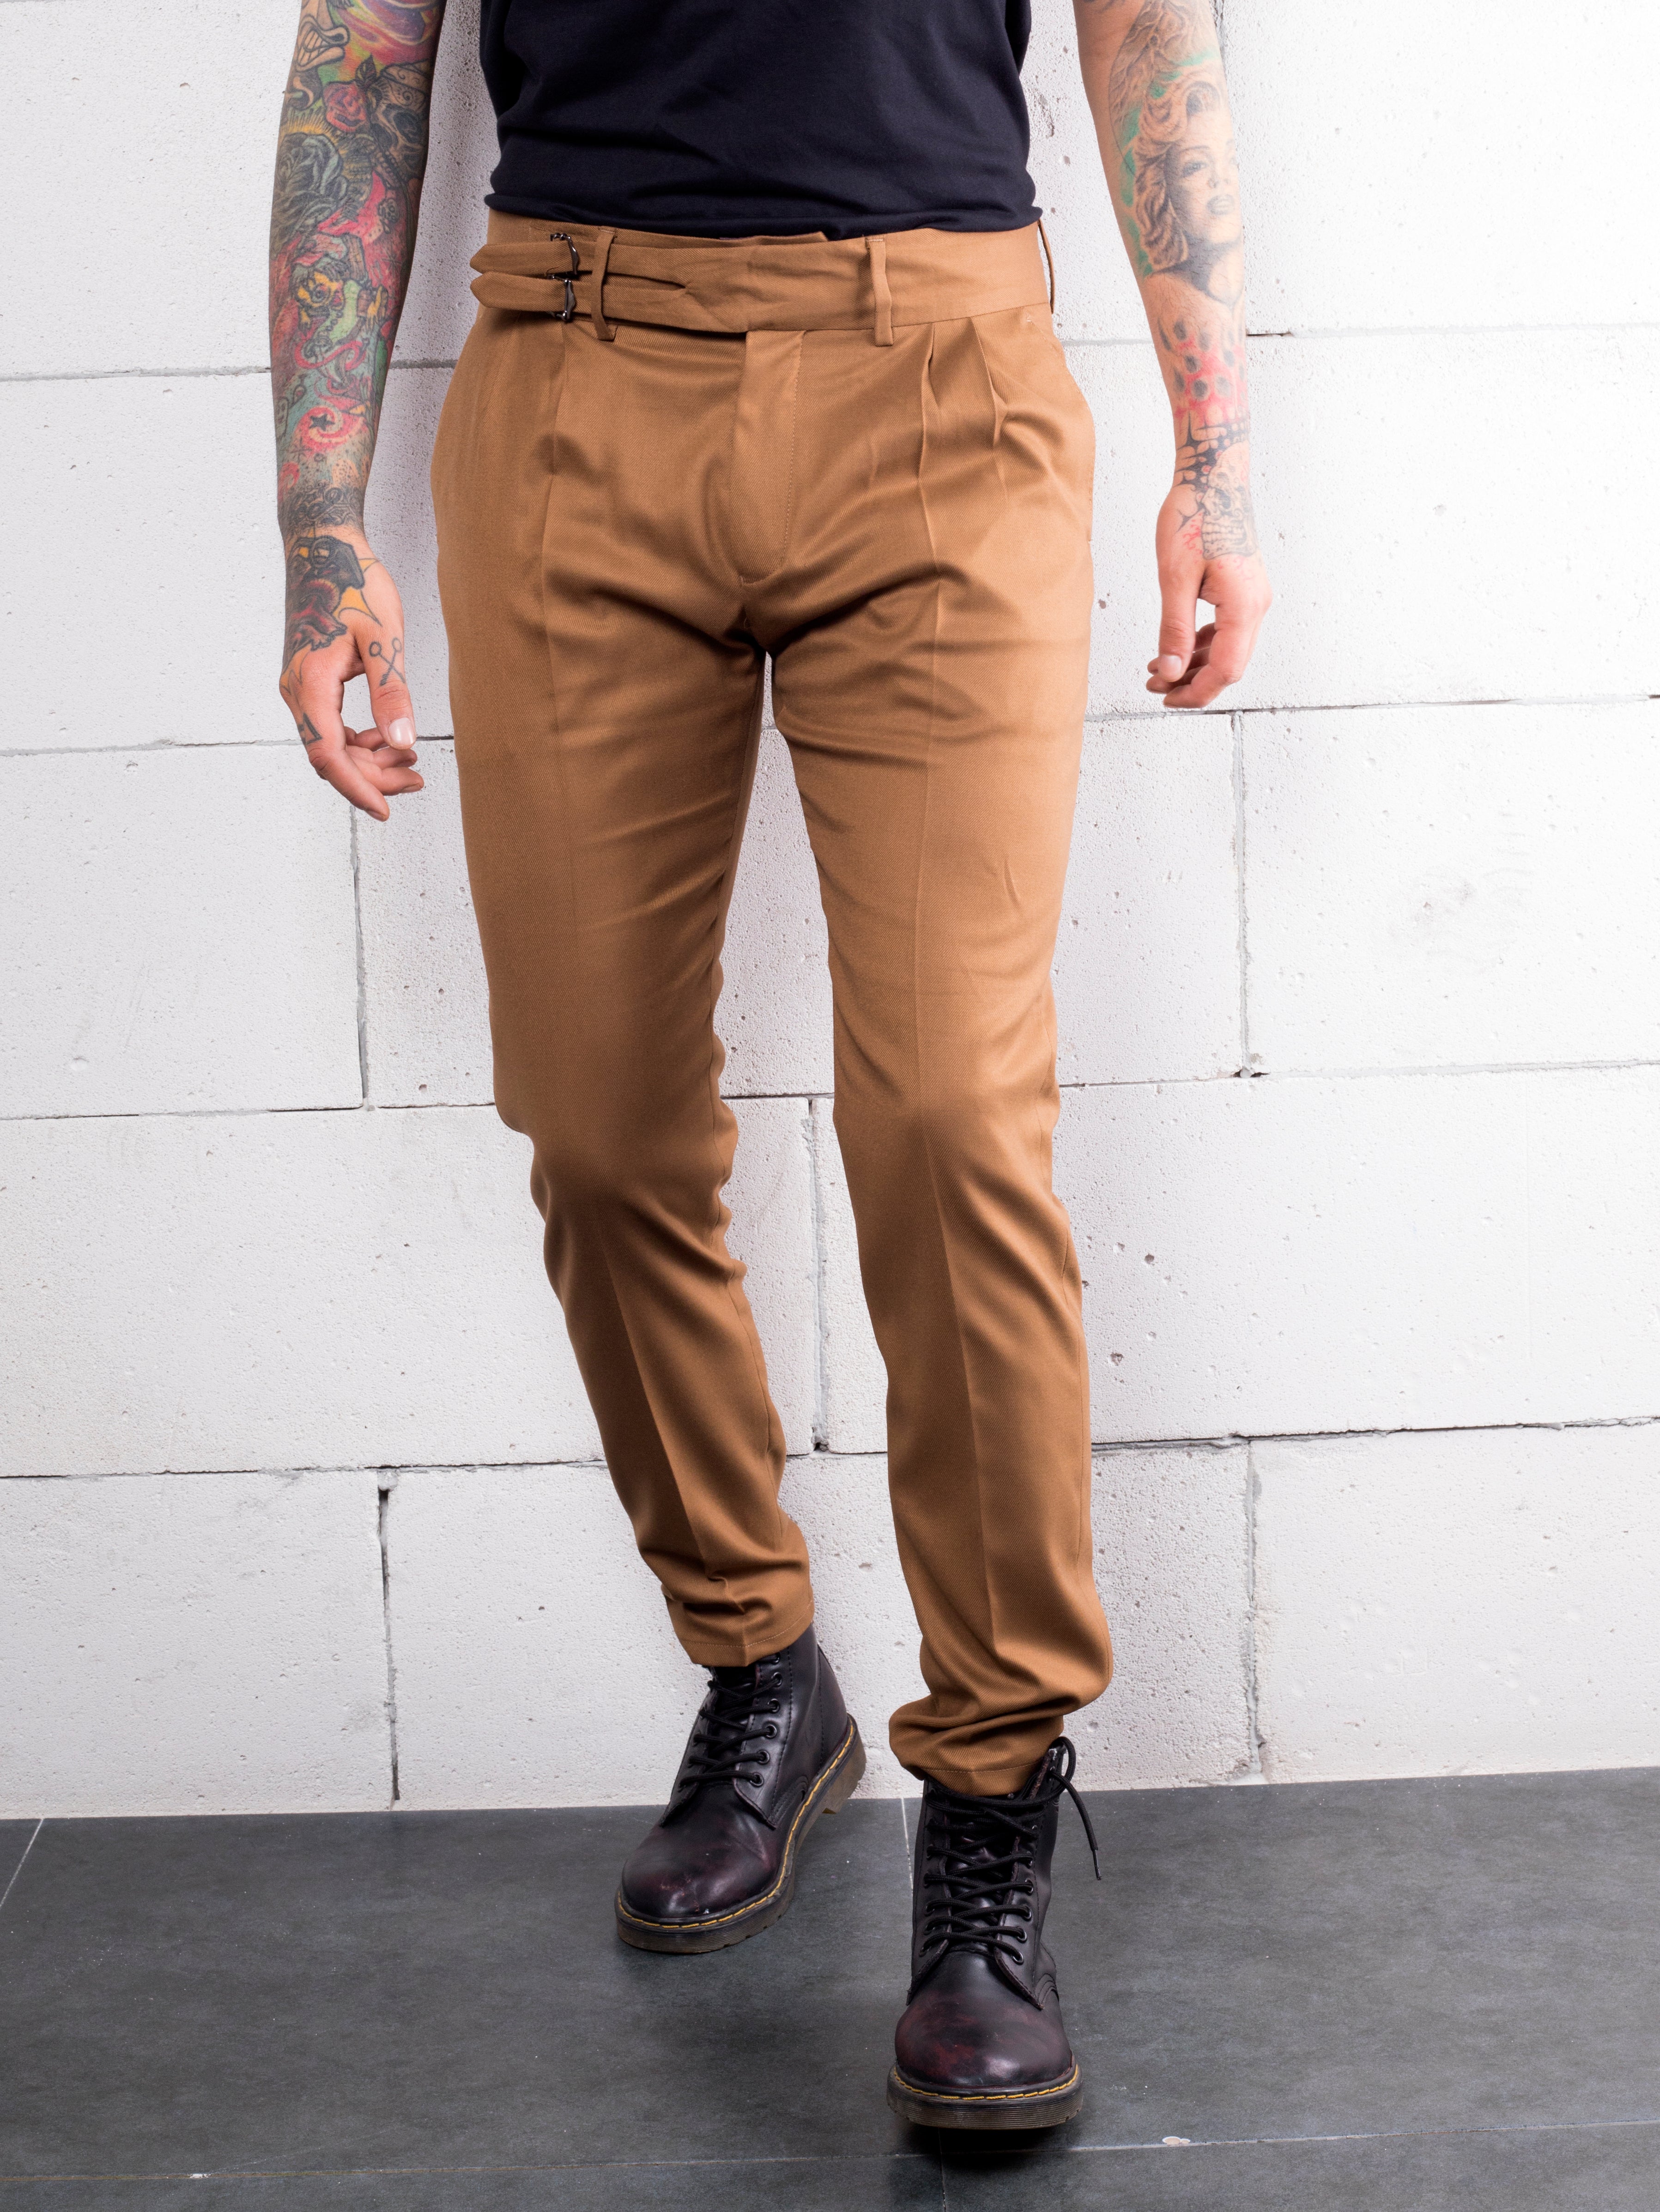 A man with Italian fabric tattoos wearing CROISSANT cotton-stretch tan chinos from Los Angeles.